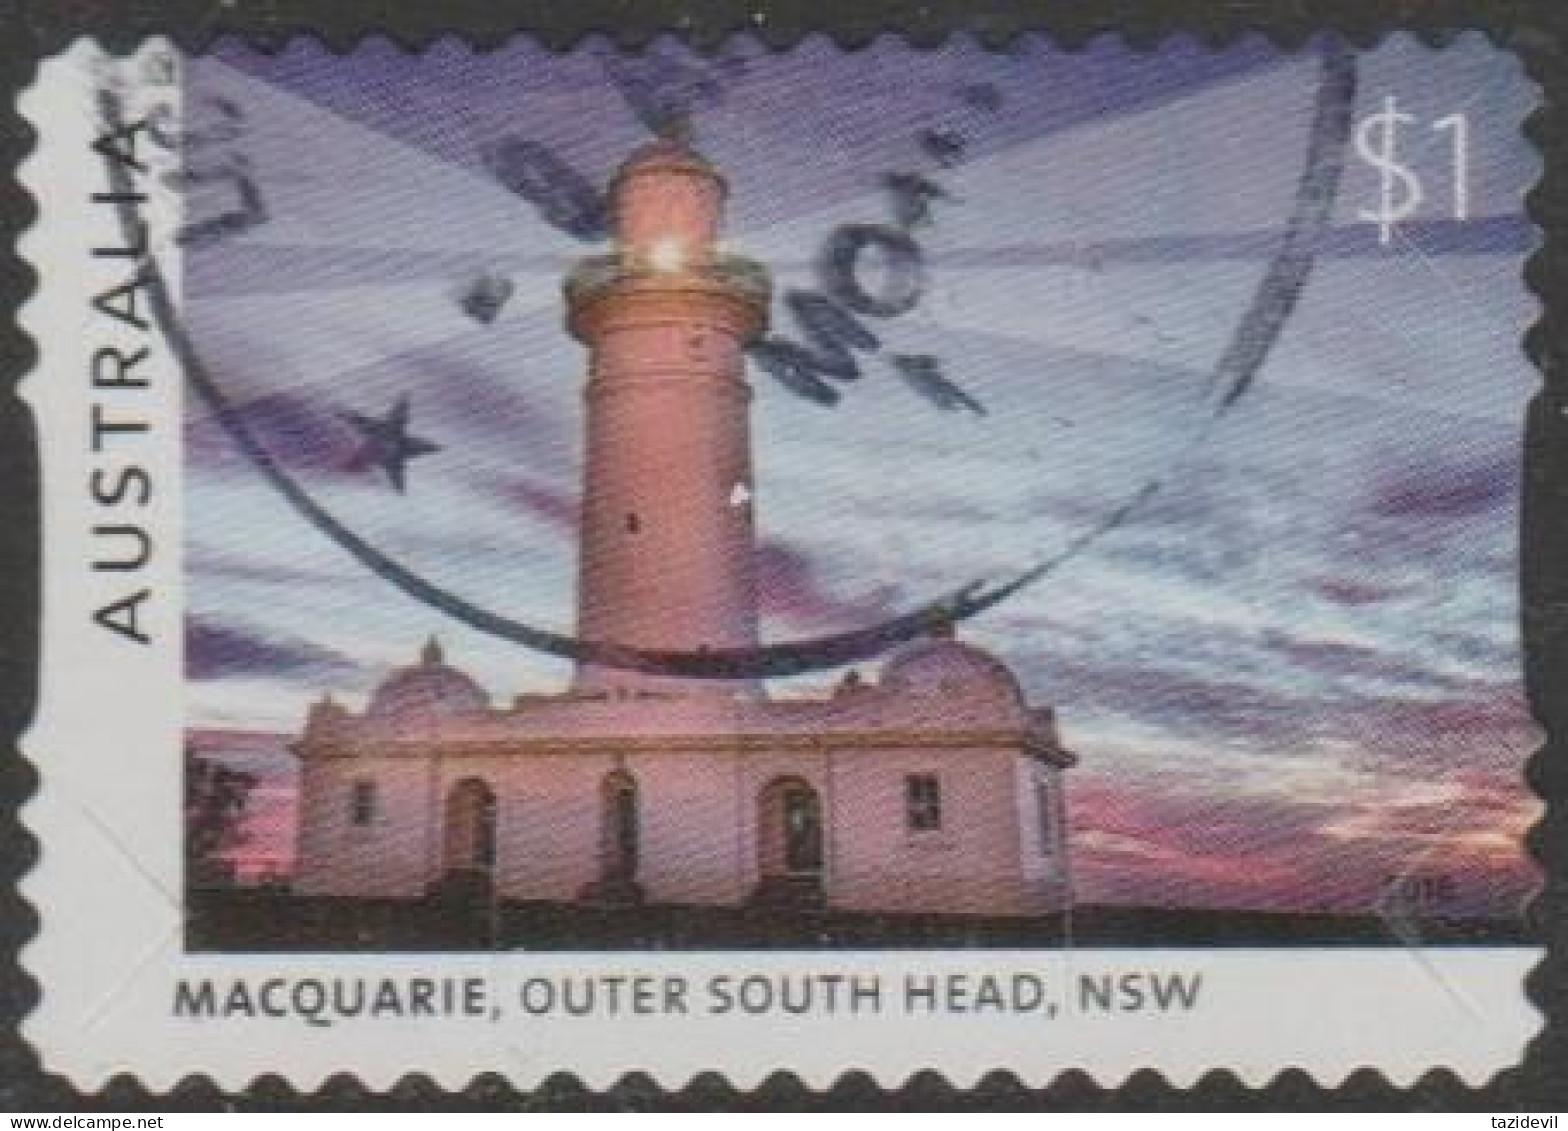 AUSTRALIA - DIE-CUT- USED - 2018 $1.00 Lighthouses Of Sydney - Macquarie Outer South Head, New South Wales - Gebraucht